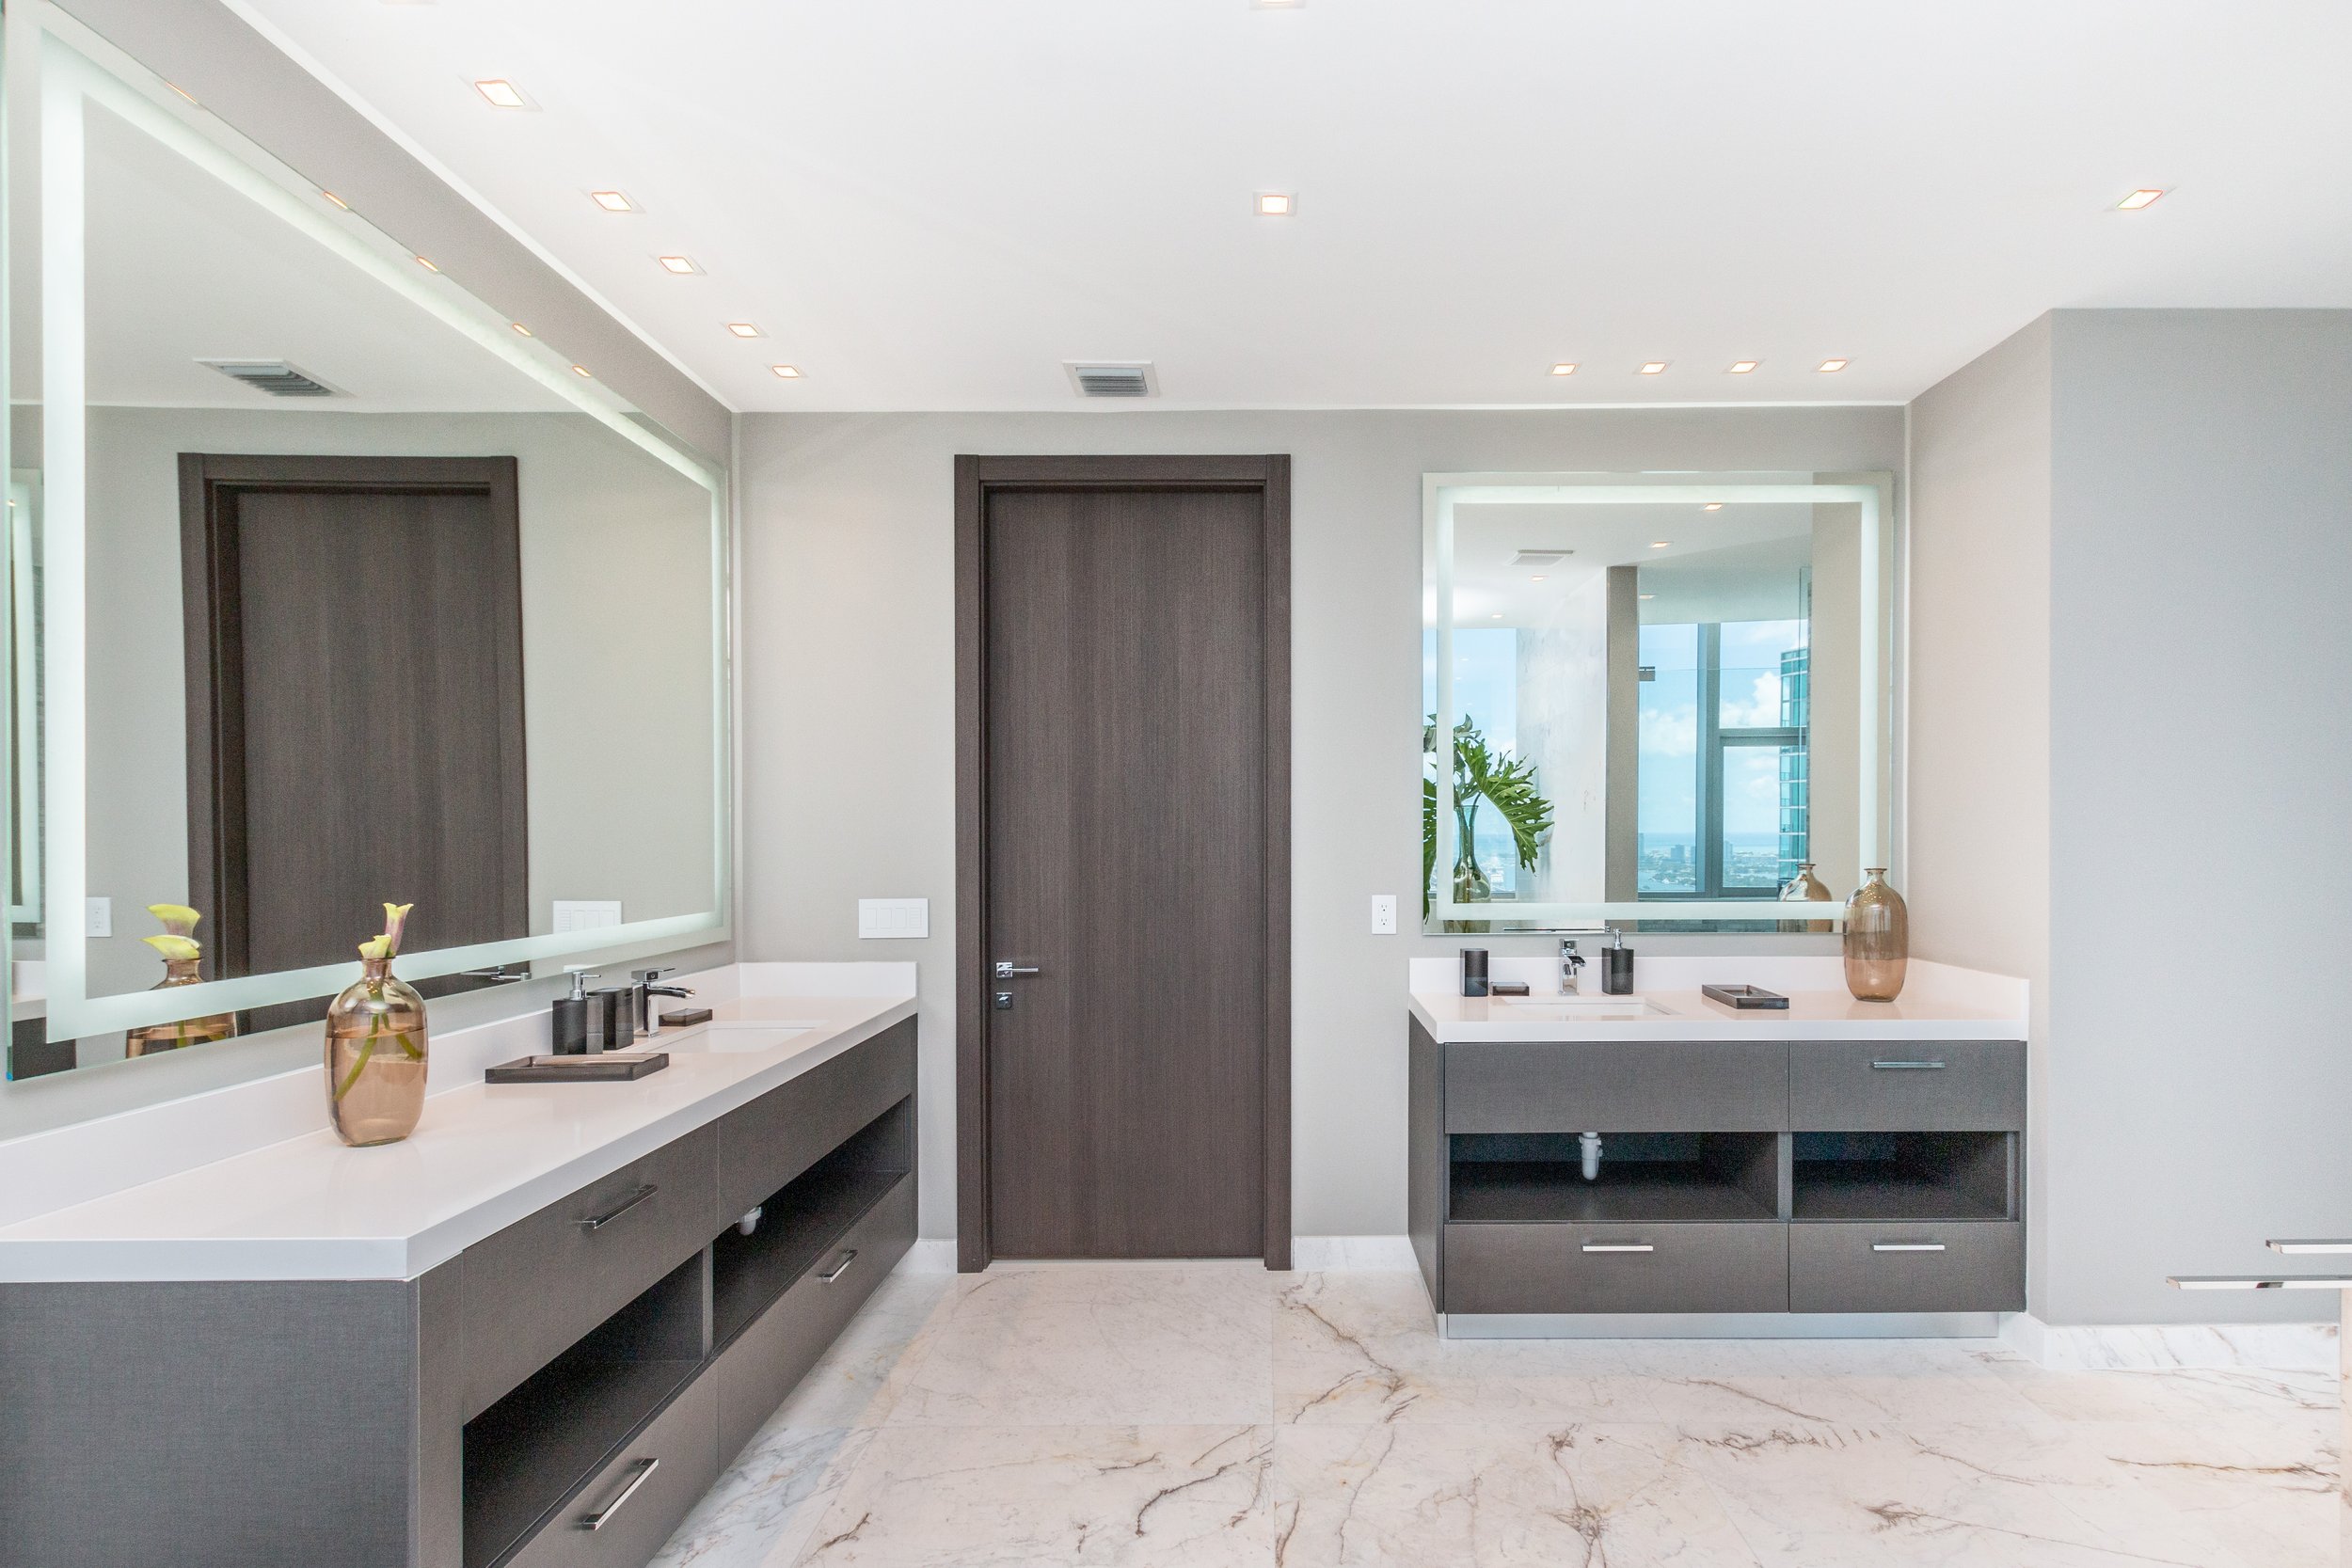 Step Inside A Sky-High Ultra-Luxe Penthouse At PARAMOUNT Miami Worldcenter For Rent Asking $40K Per Month ALTARA Properties Scott Lawrence Porter 1.54.jpg